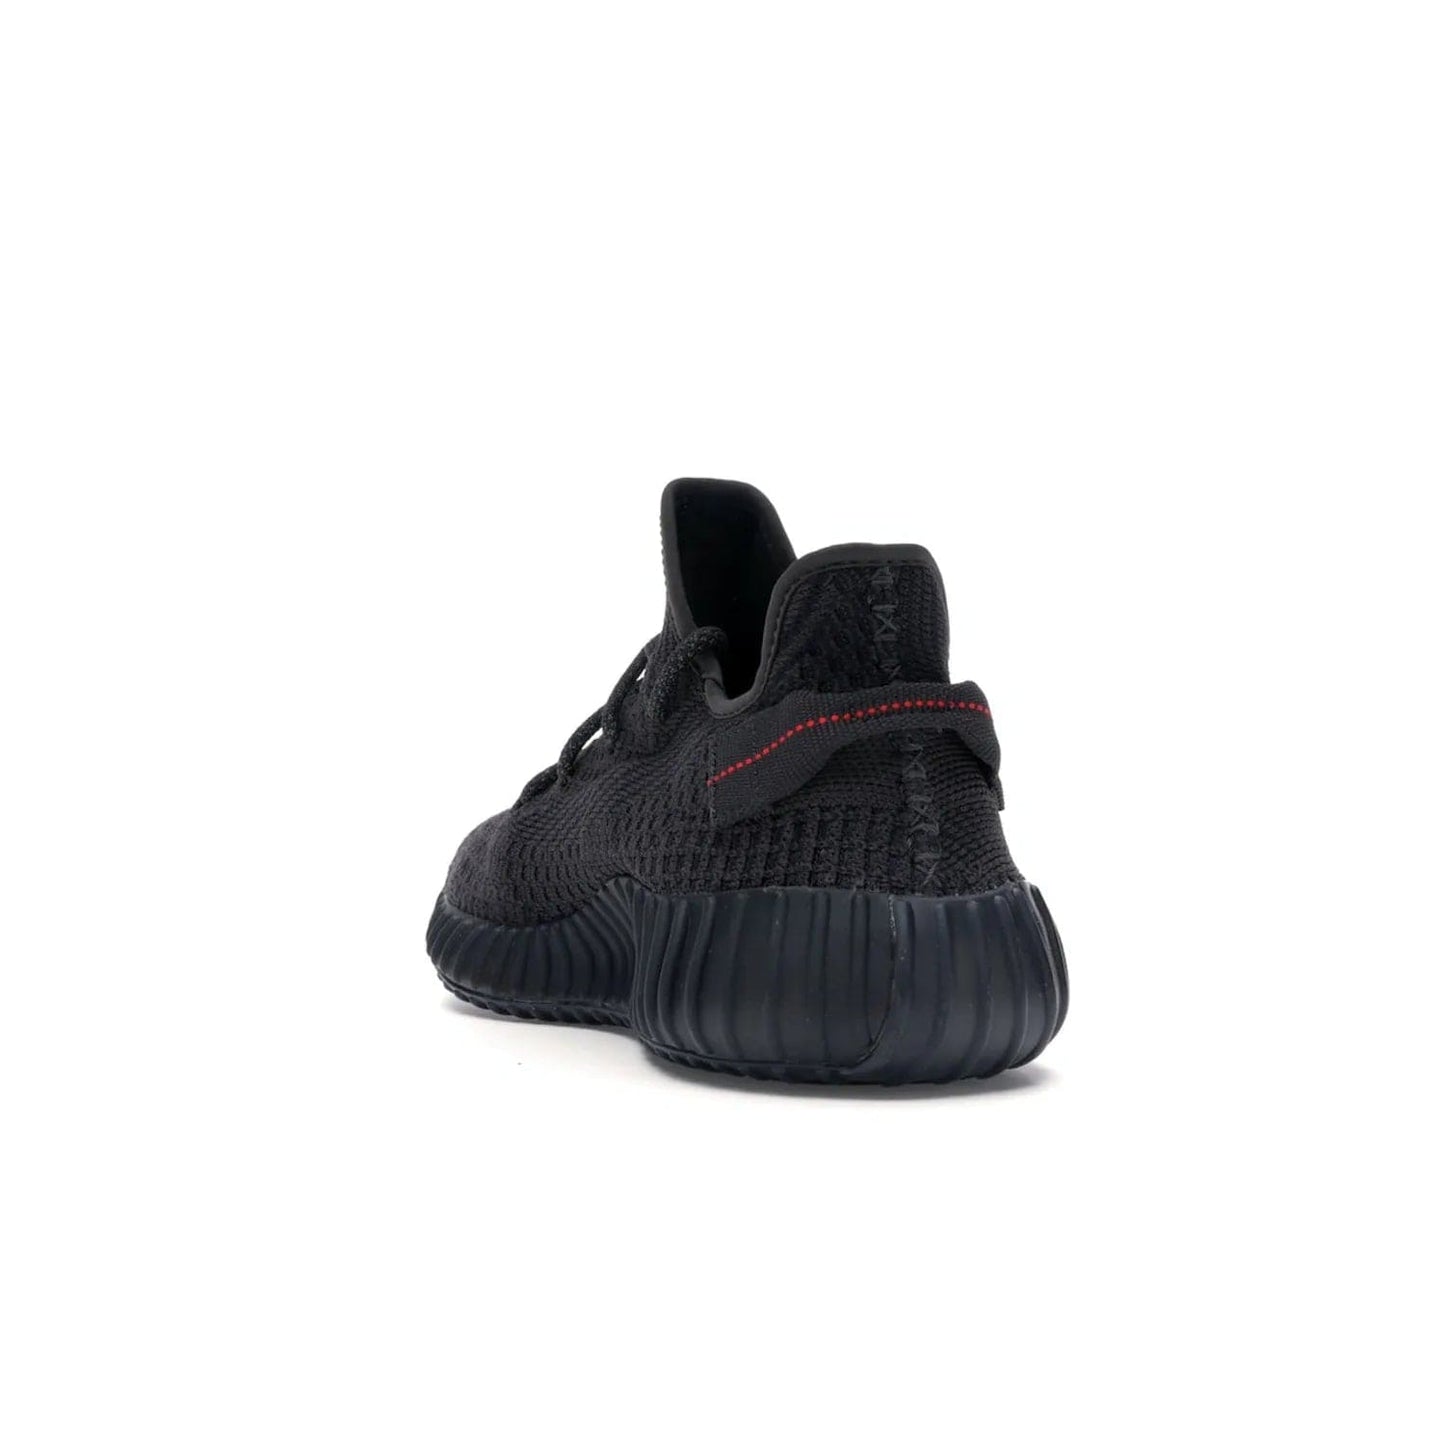 adidas Yeezy Boost 350 V2 Black (Non-Reflective) - Image 26 - Only at www.BallersClubKickz.com - A timeless, sleek silhouette crafted from quality materials. The adidas Yeezy Boost 350 V2 Black (Non-Reflective) brings style and sophistication. Get yours now!